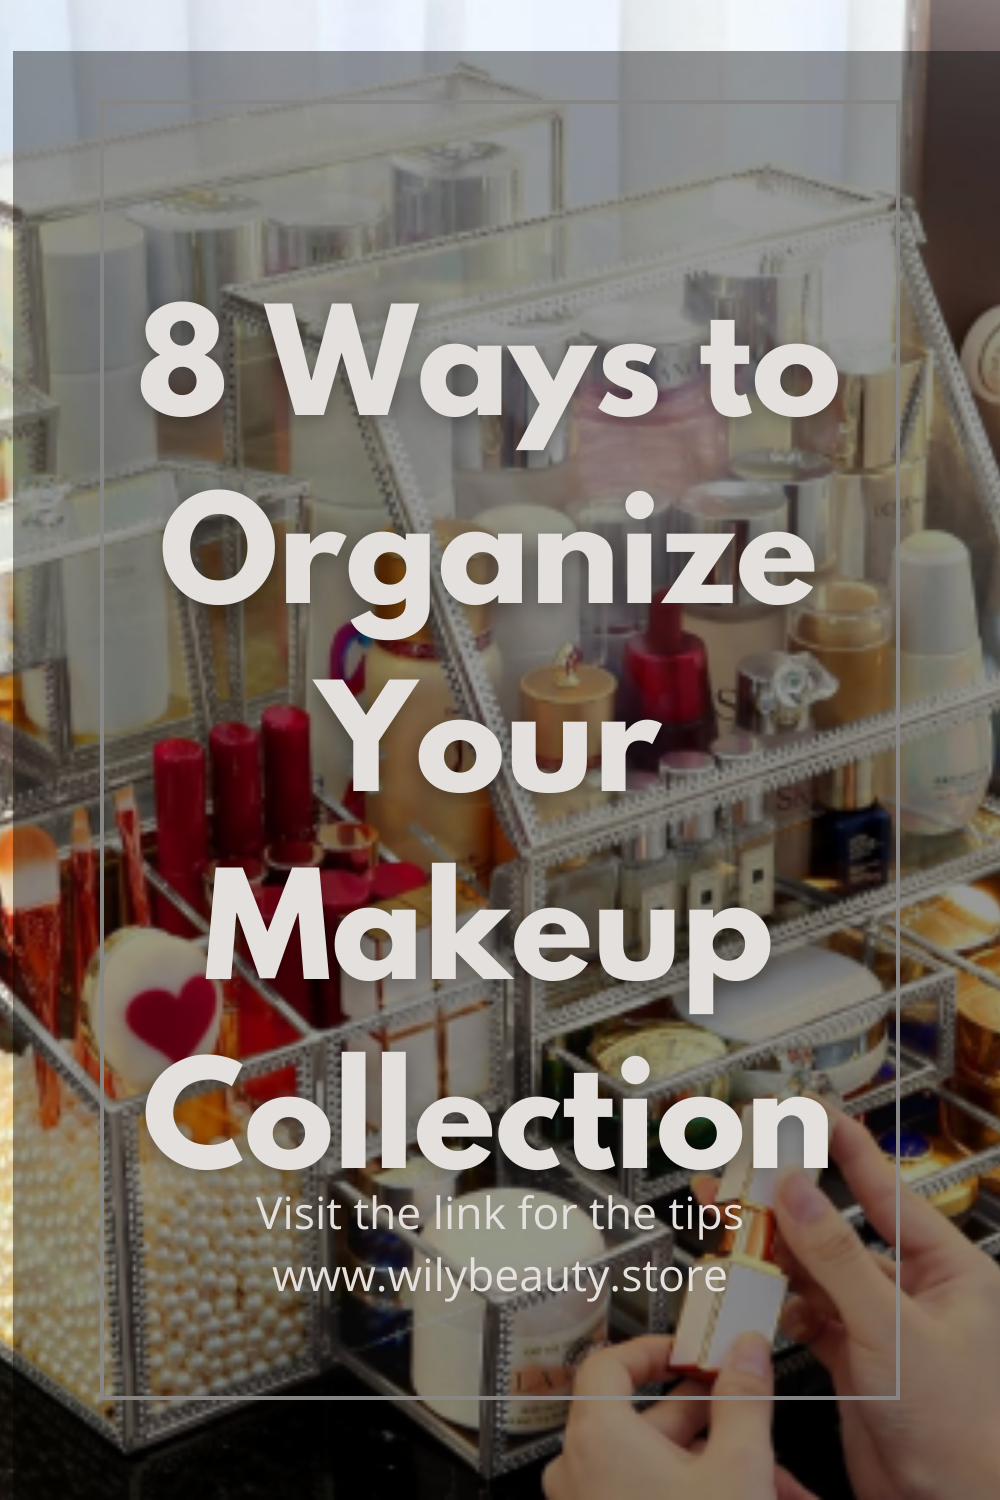 8 Ways to Organize Your Makeup Collection